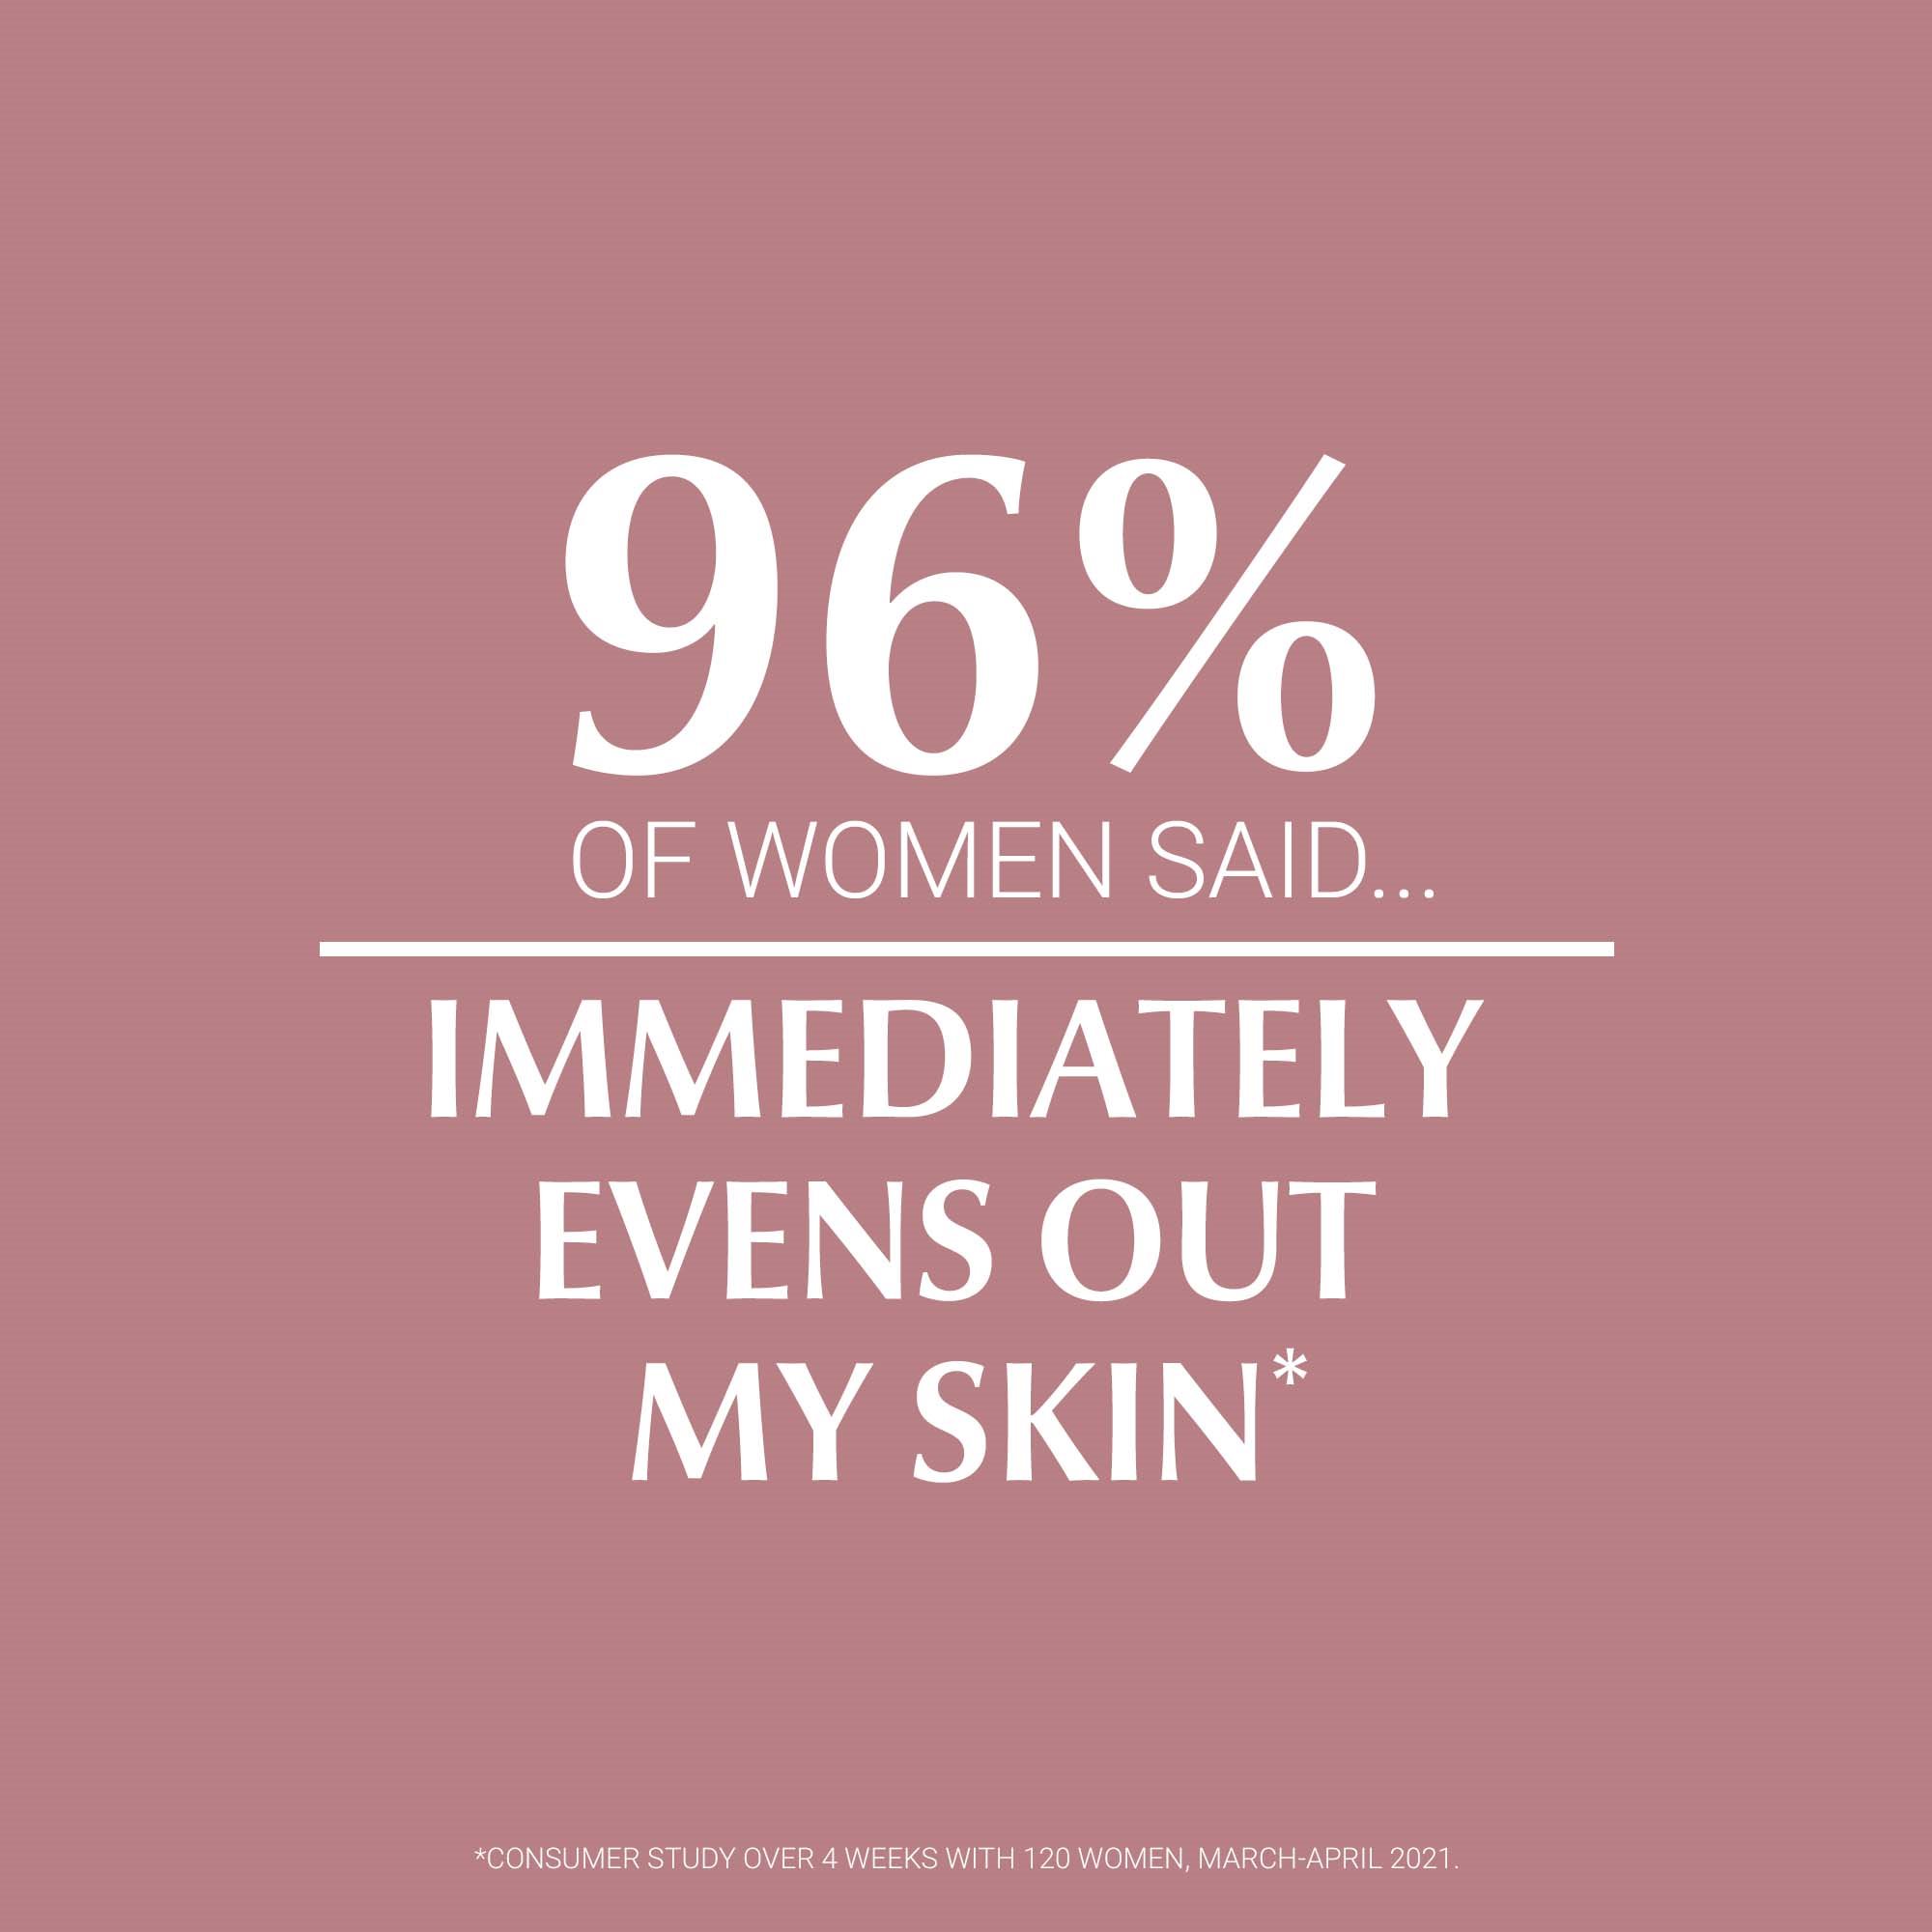 95% of women say Eucerin Anti-Pigment Day SPF 30 Tinted Light “immediately evens out my skin.” 